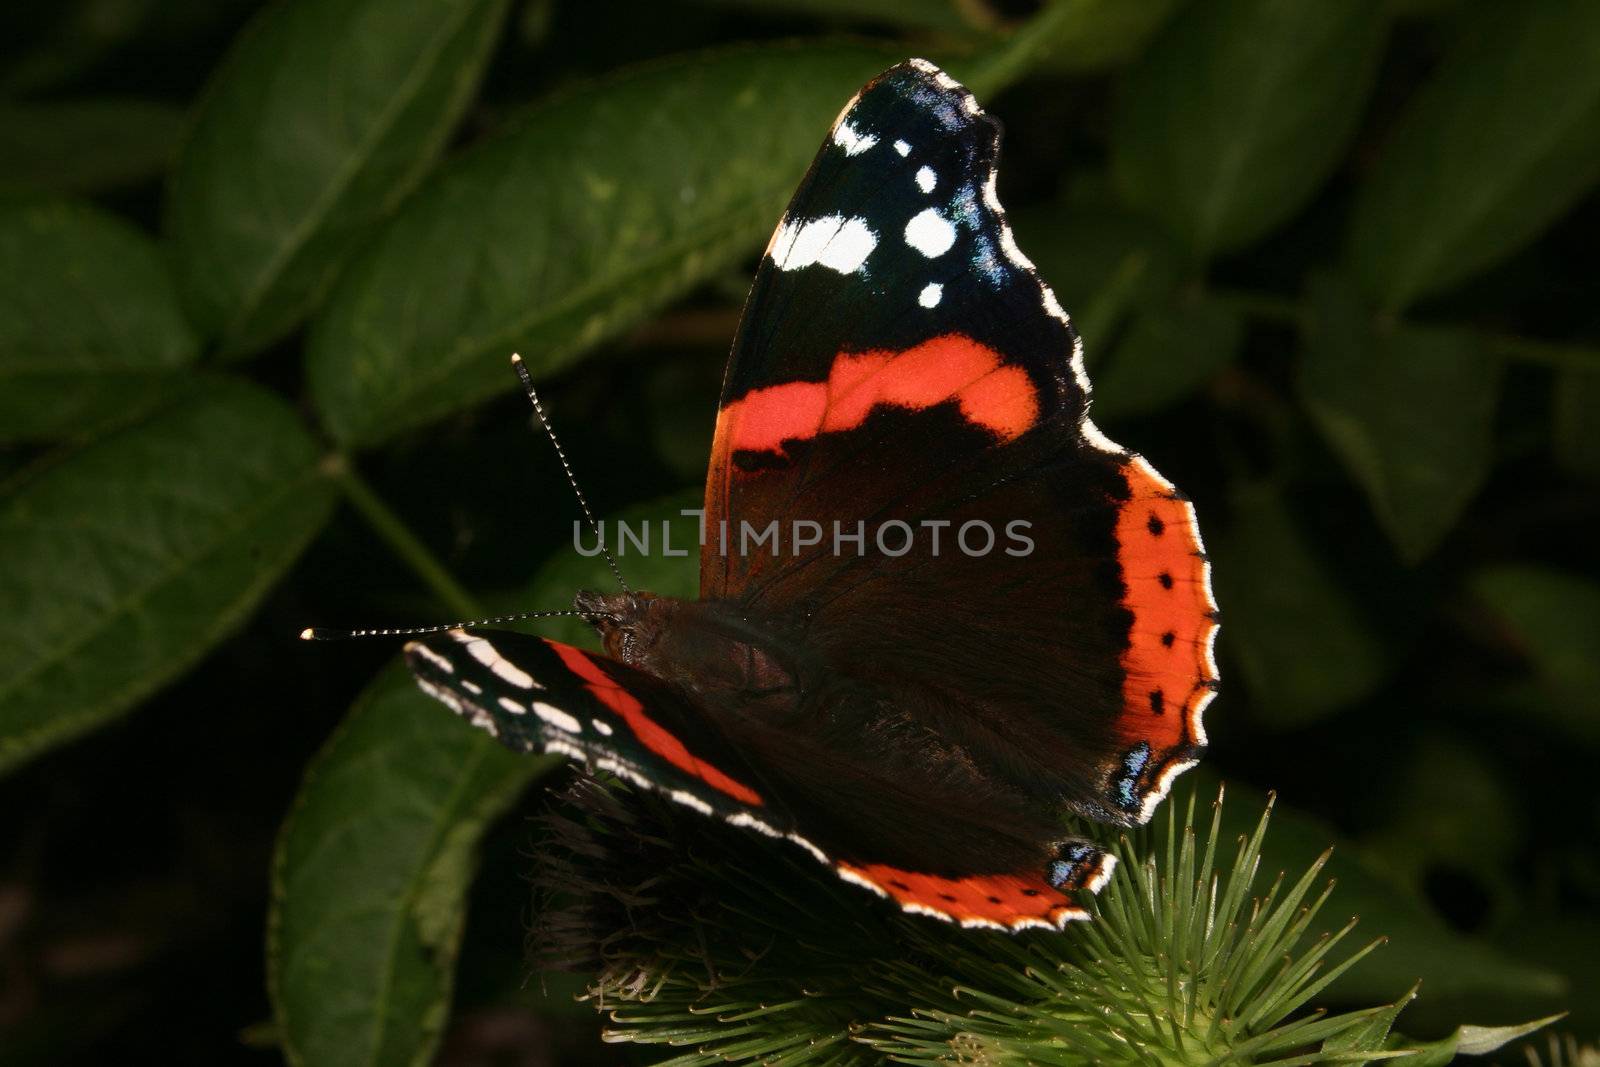 Red Admiral (Vanessa atalanta) by tdietrich